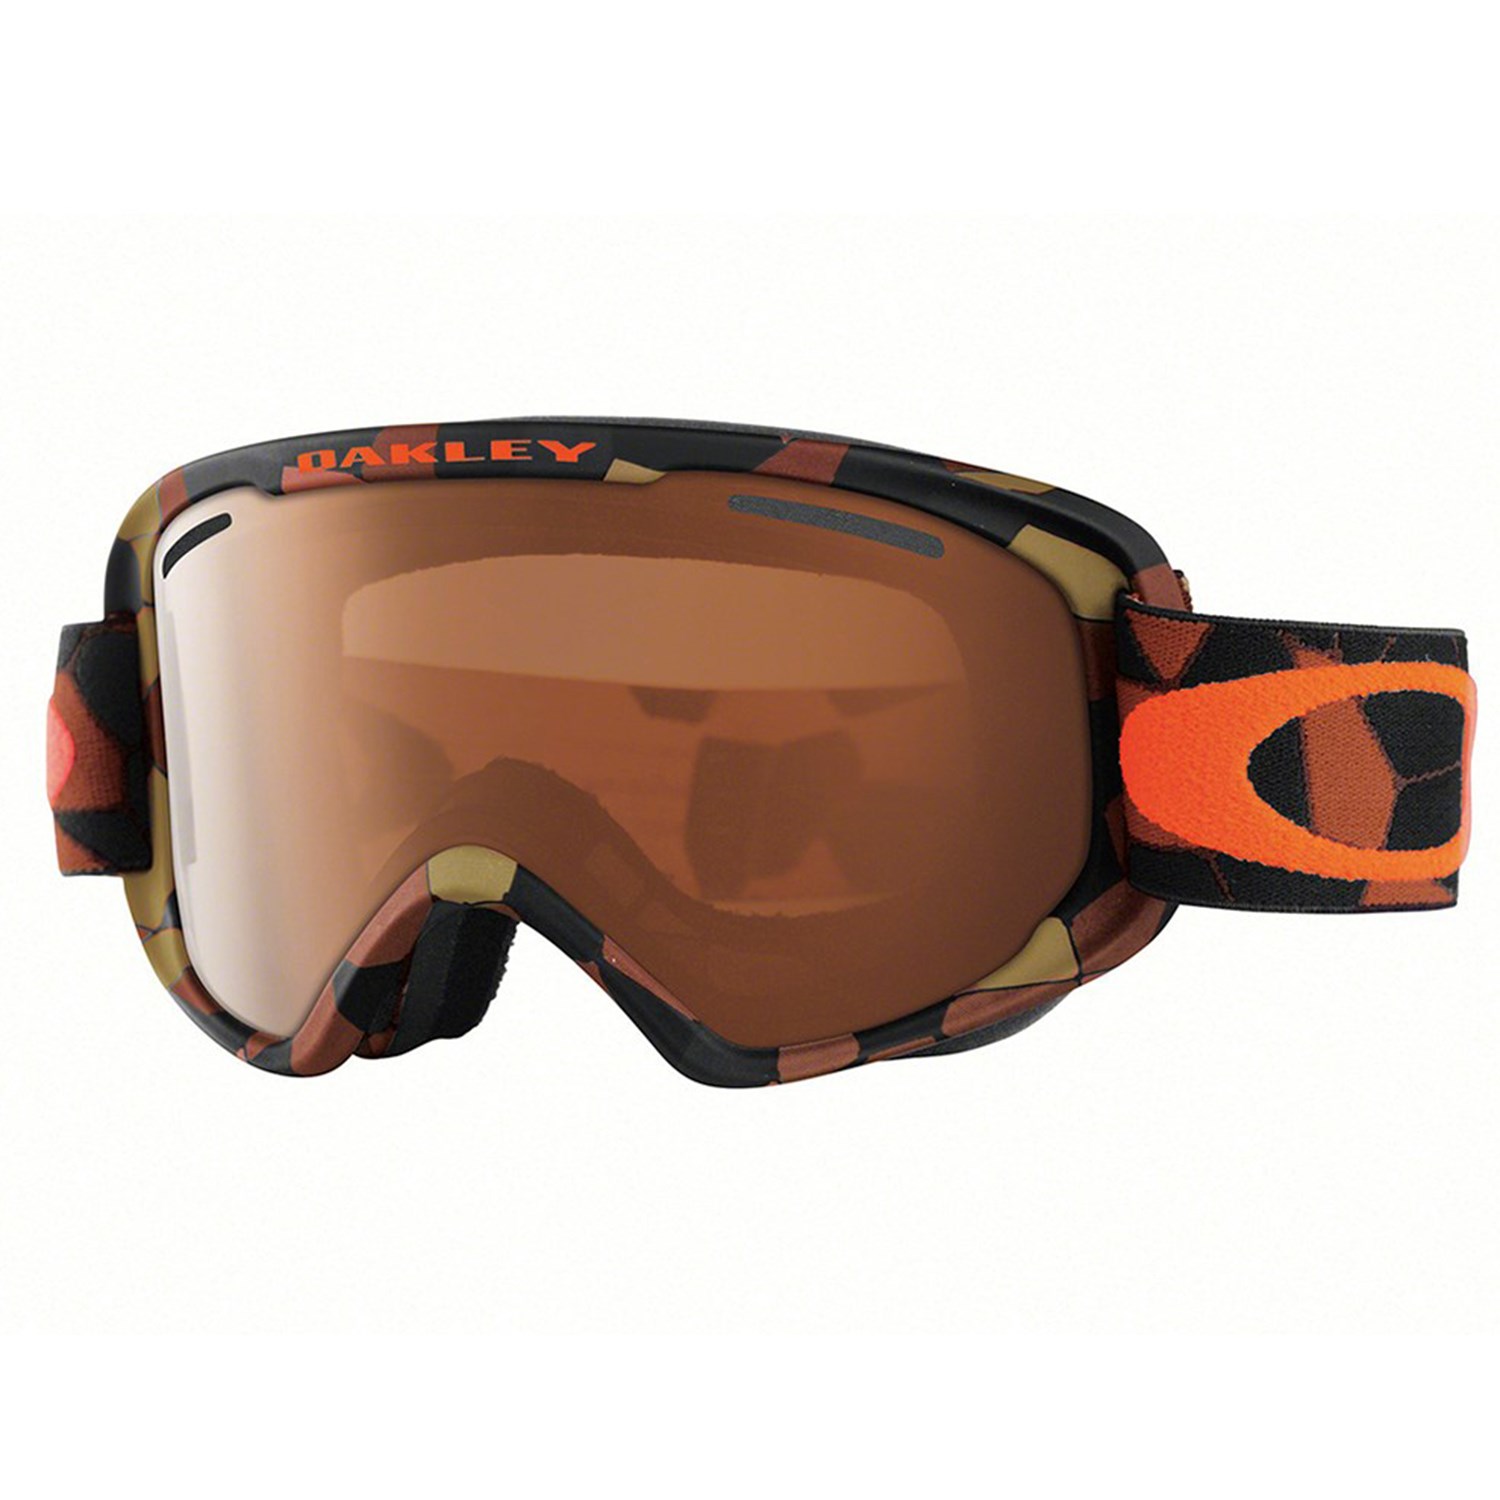 oakley o2 xm goggles review